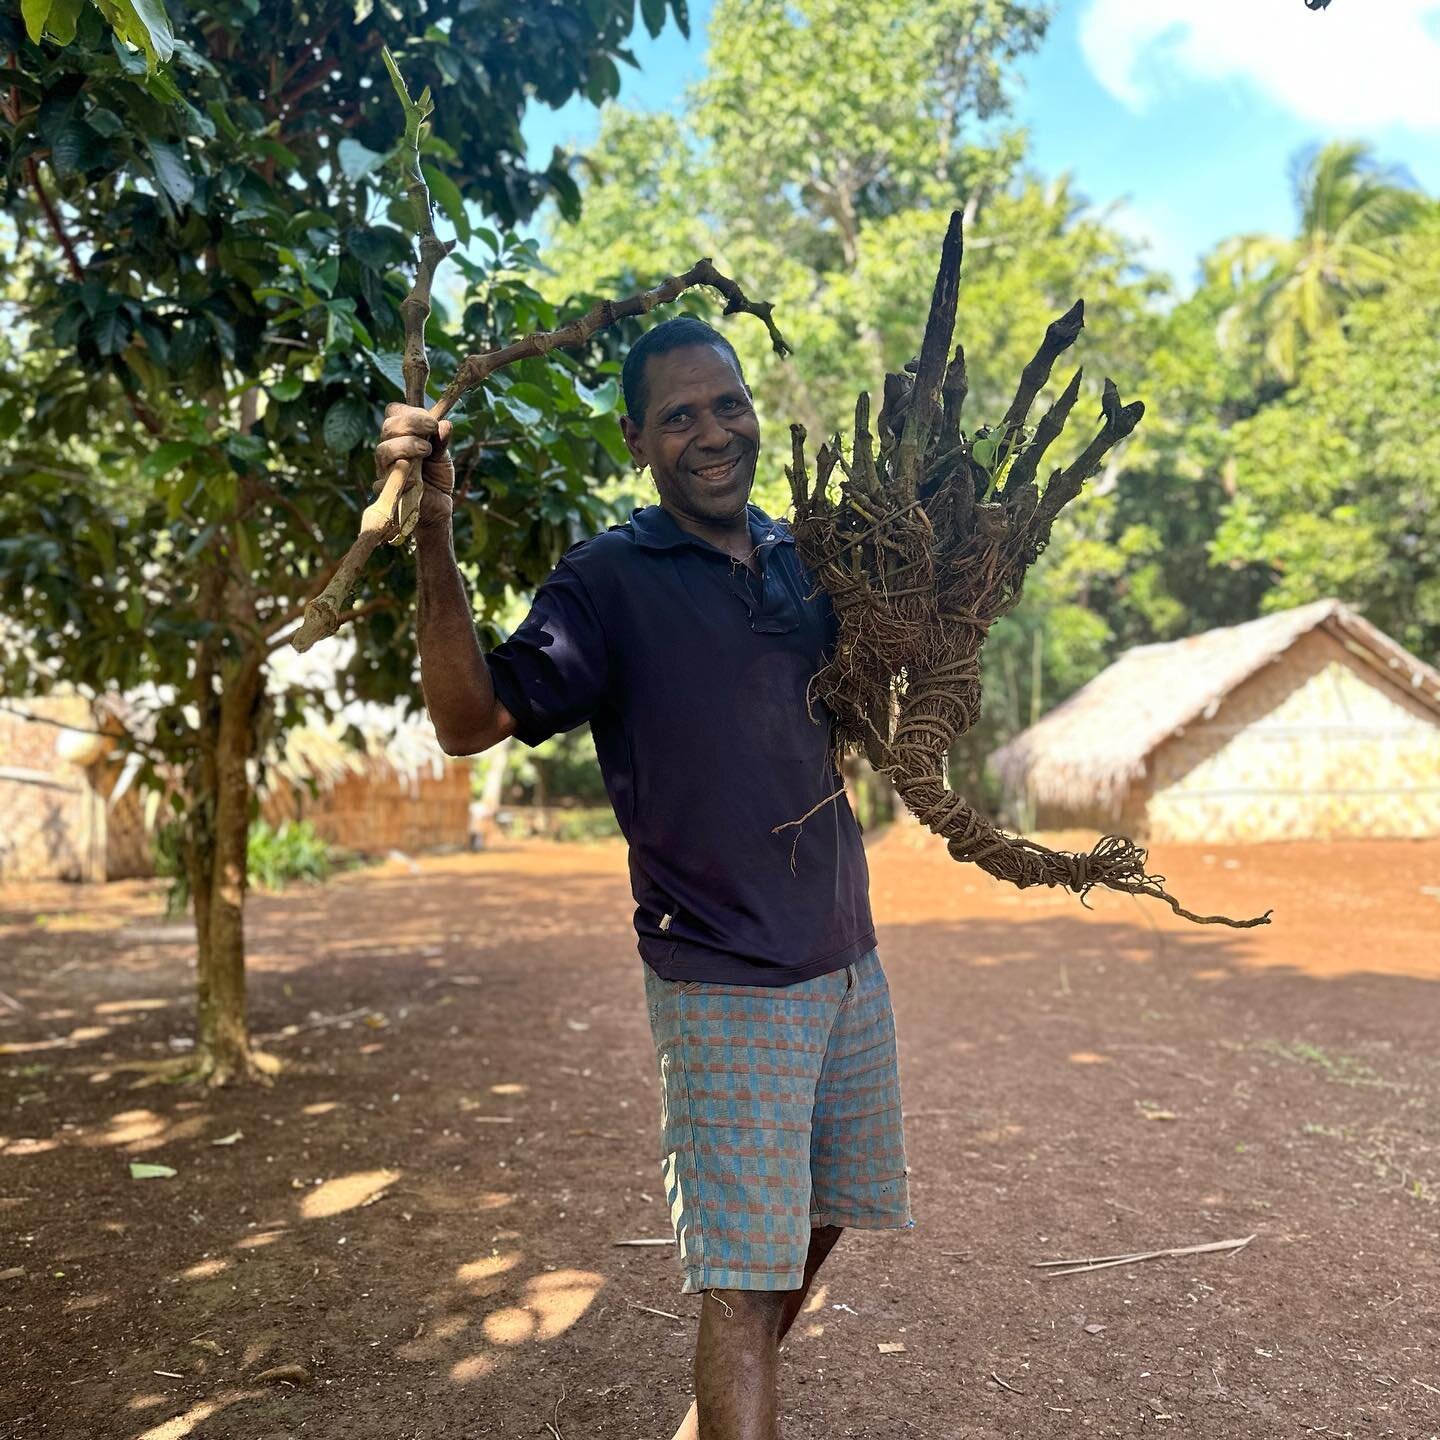 Banelang holding up some Kava roots that he harvested from his garden. It will be skinned, diced, smashed and squeezed, ready to be drank in the afternoon. If your interested in some of the custom ceremonies we have it this part of Vanuatu, feel free